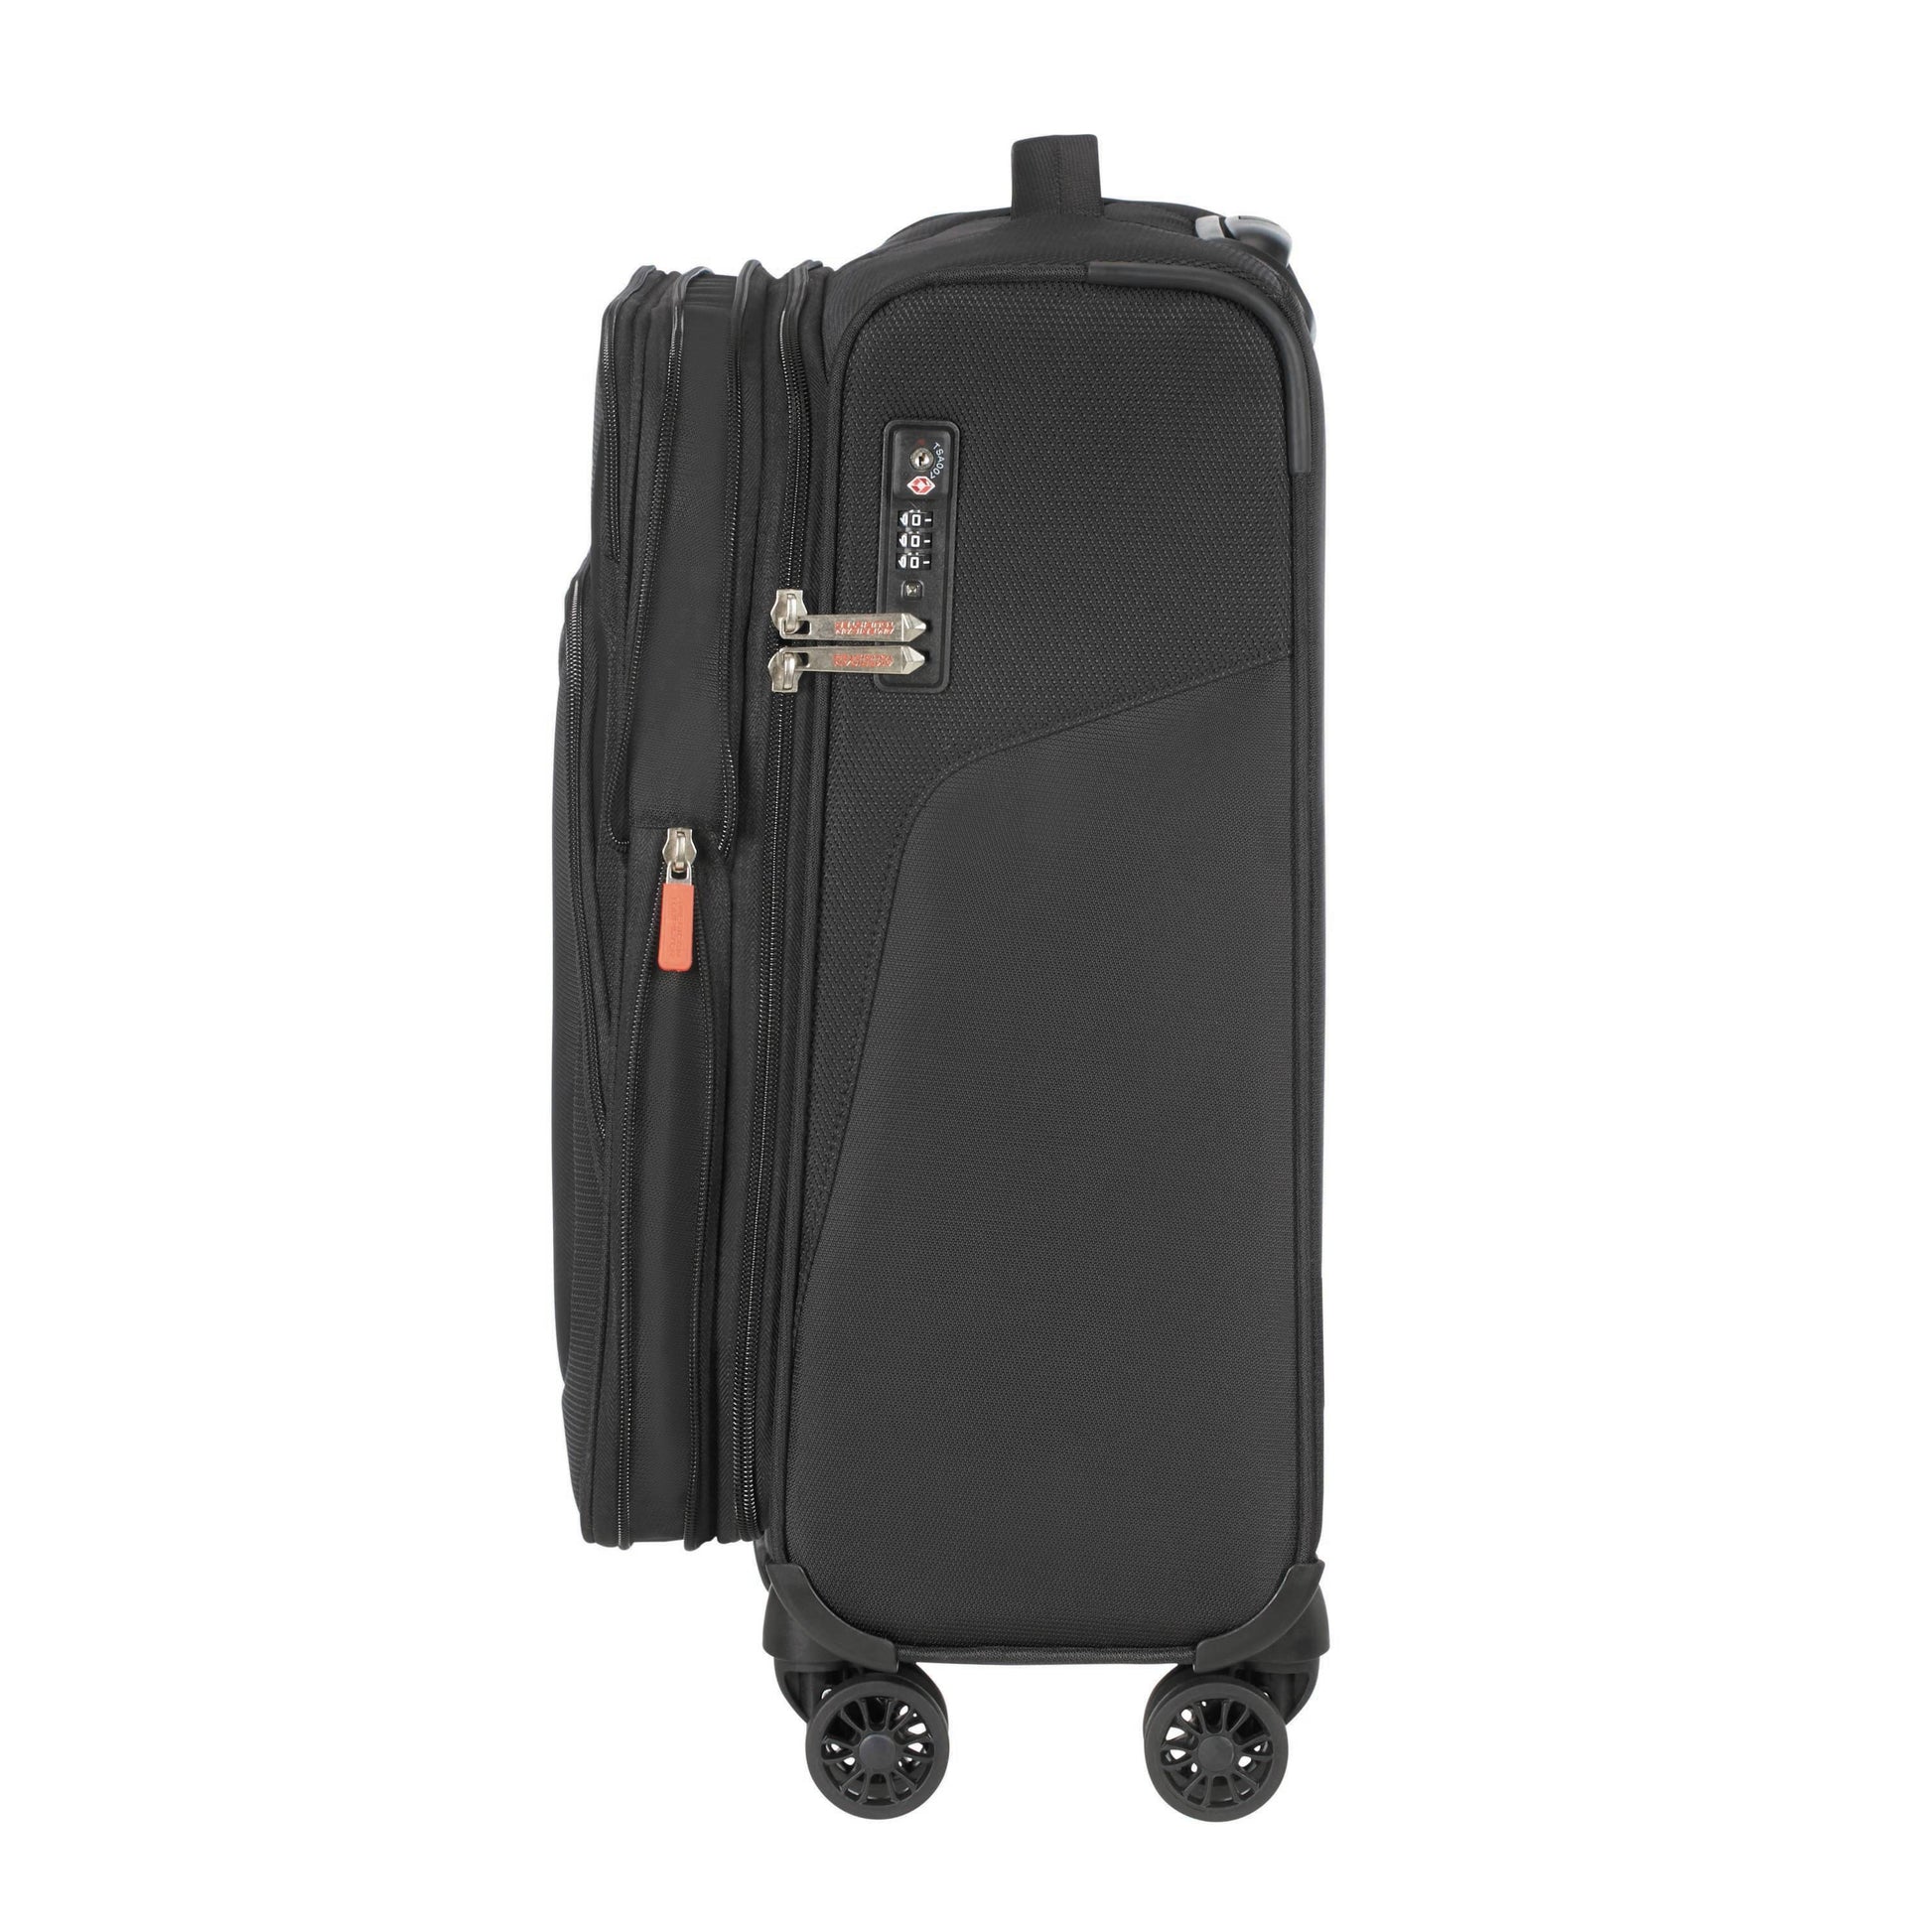 American Tourister Fly Light 3 Piece Spinner Expandable Luggage Set